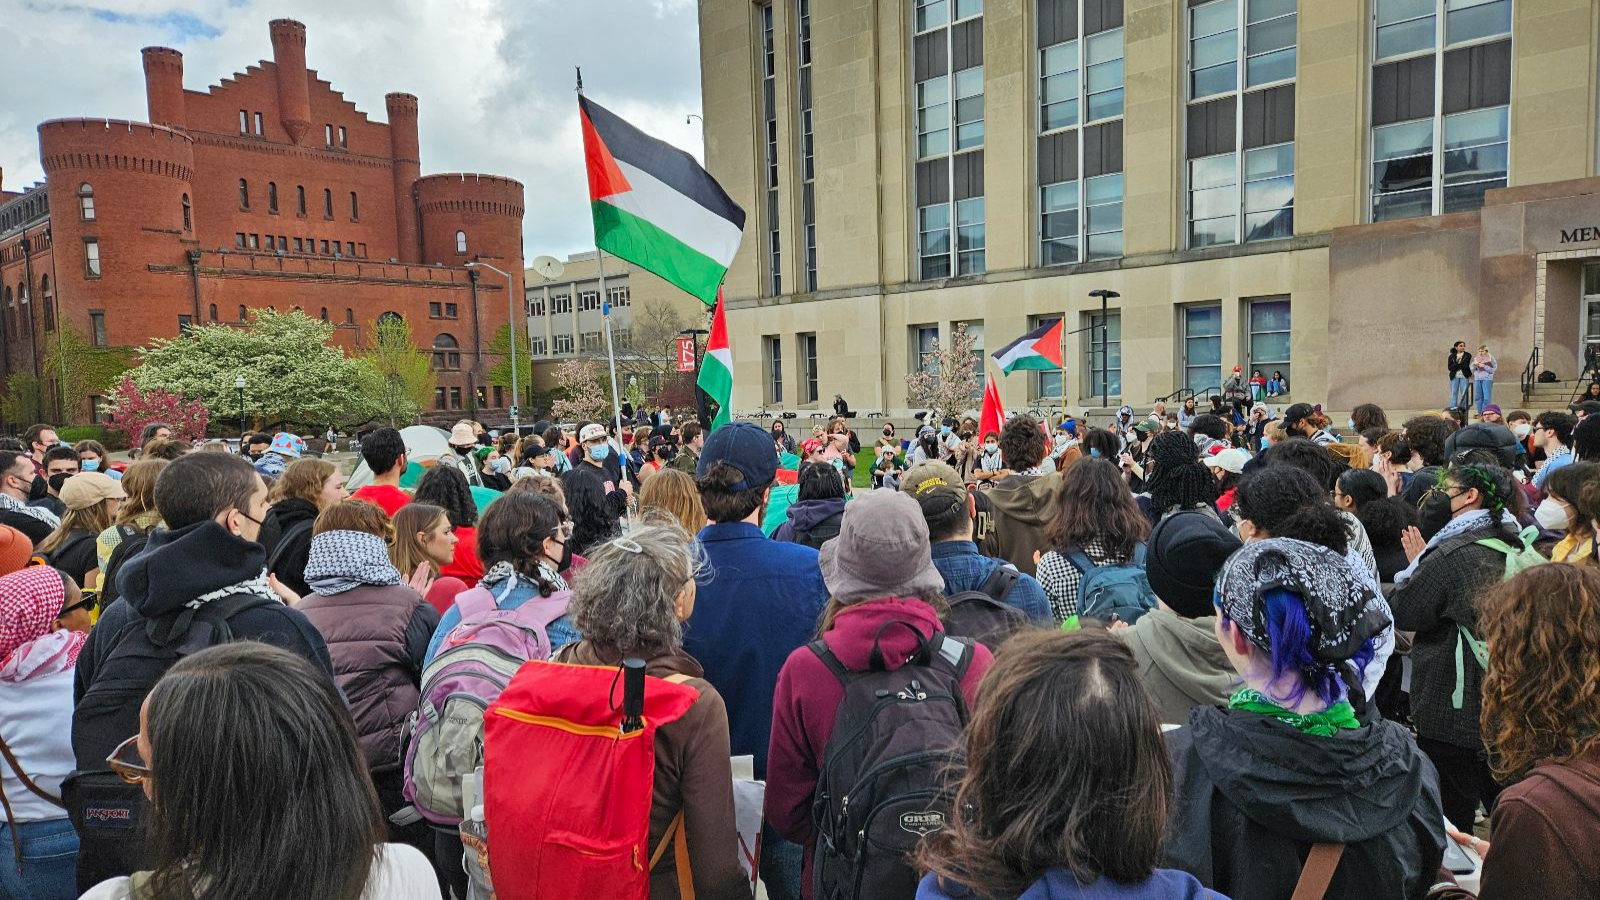 Student protests over Israel-Palestine conflict begin on UW campuses